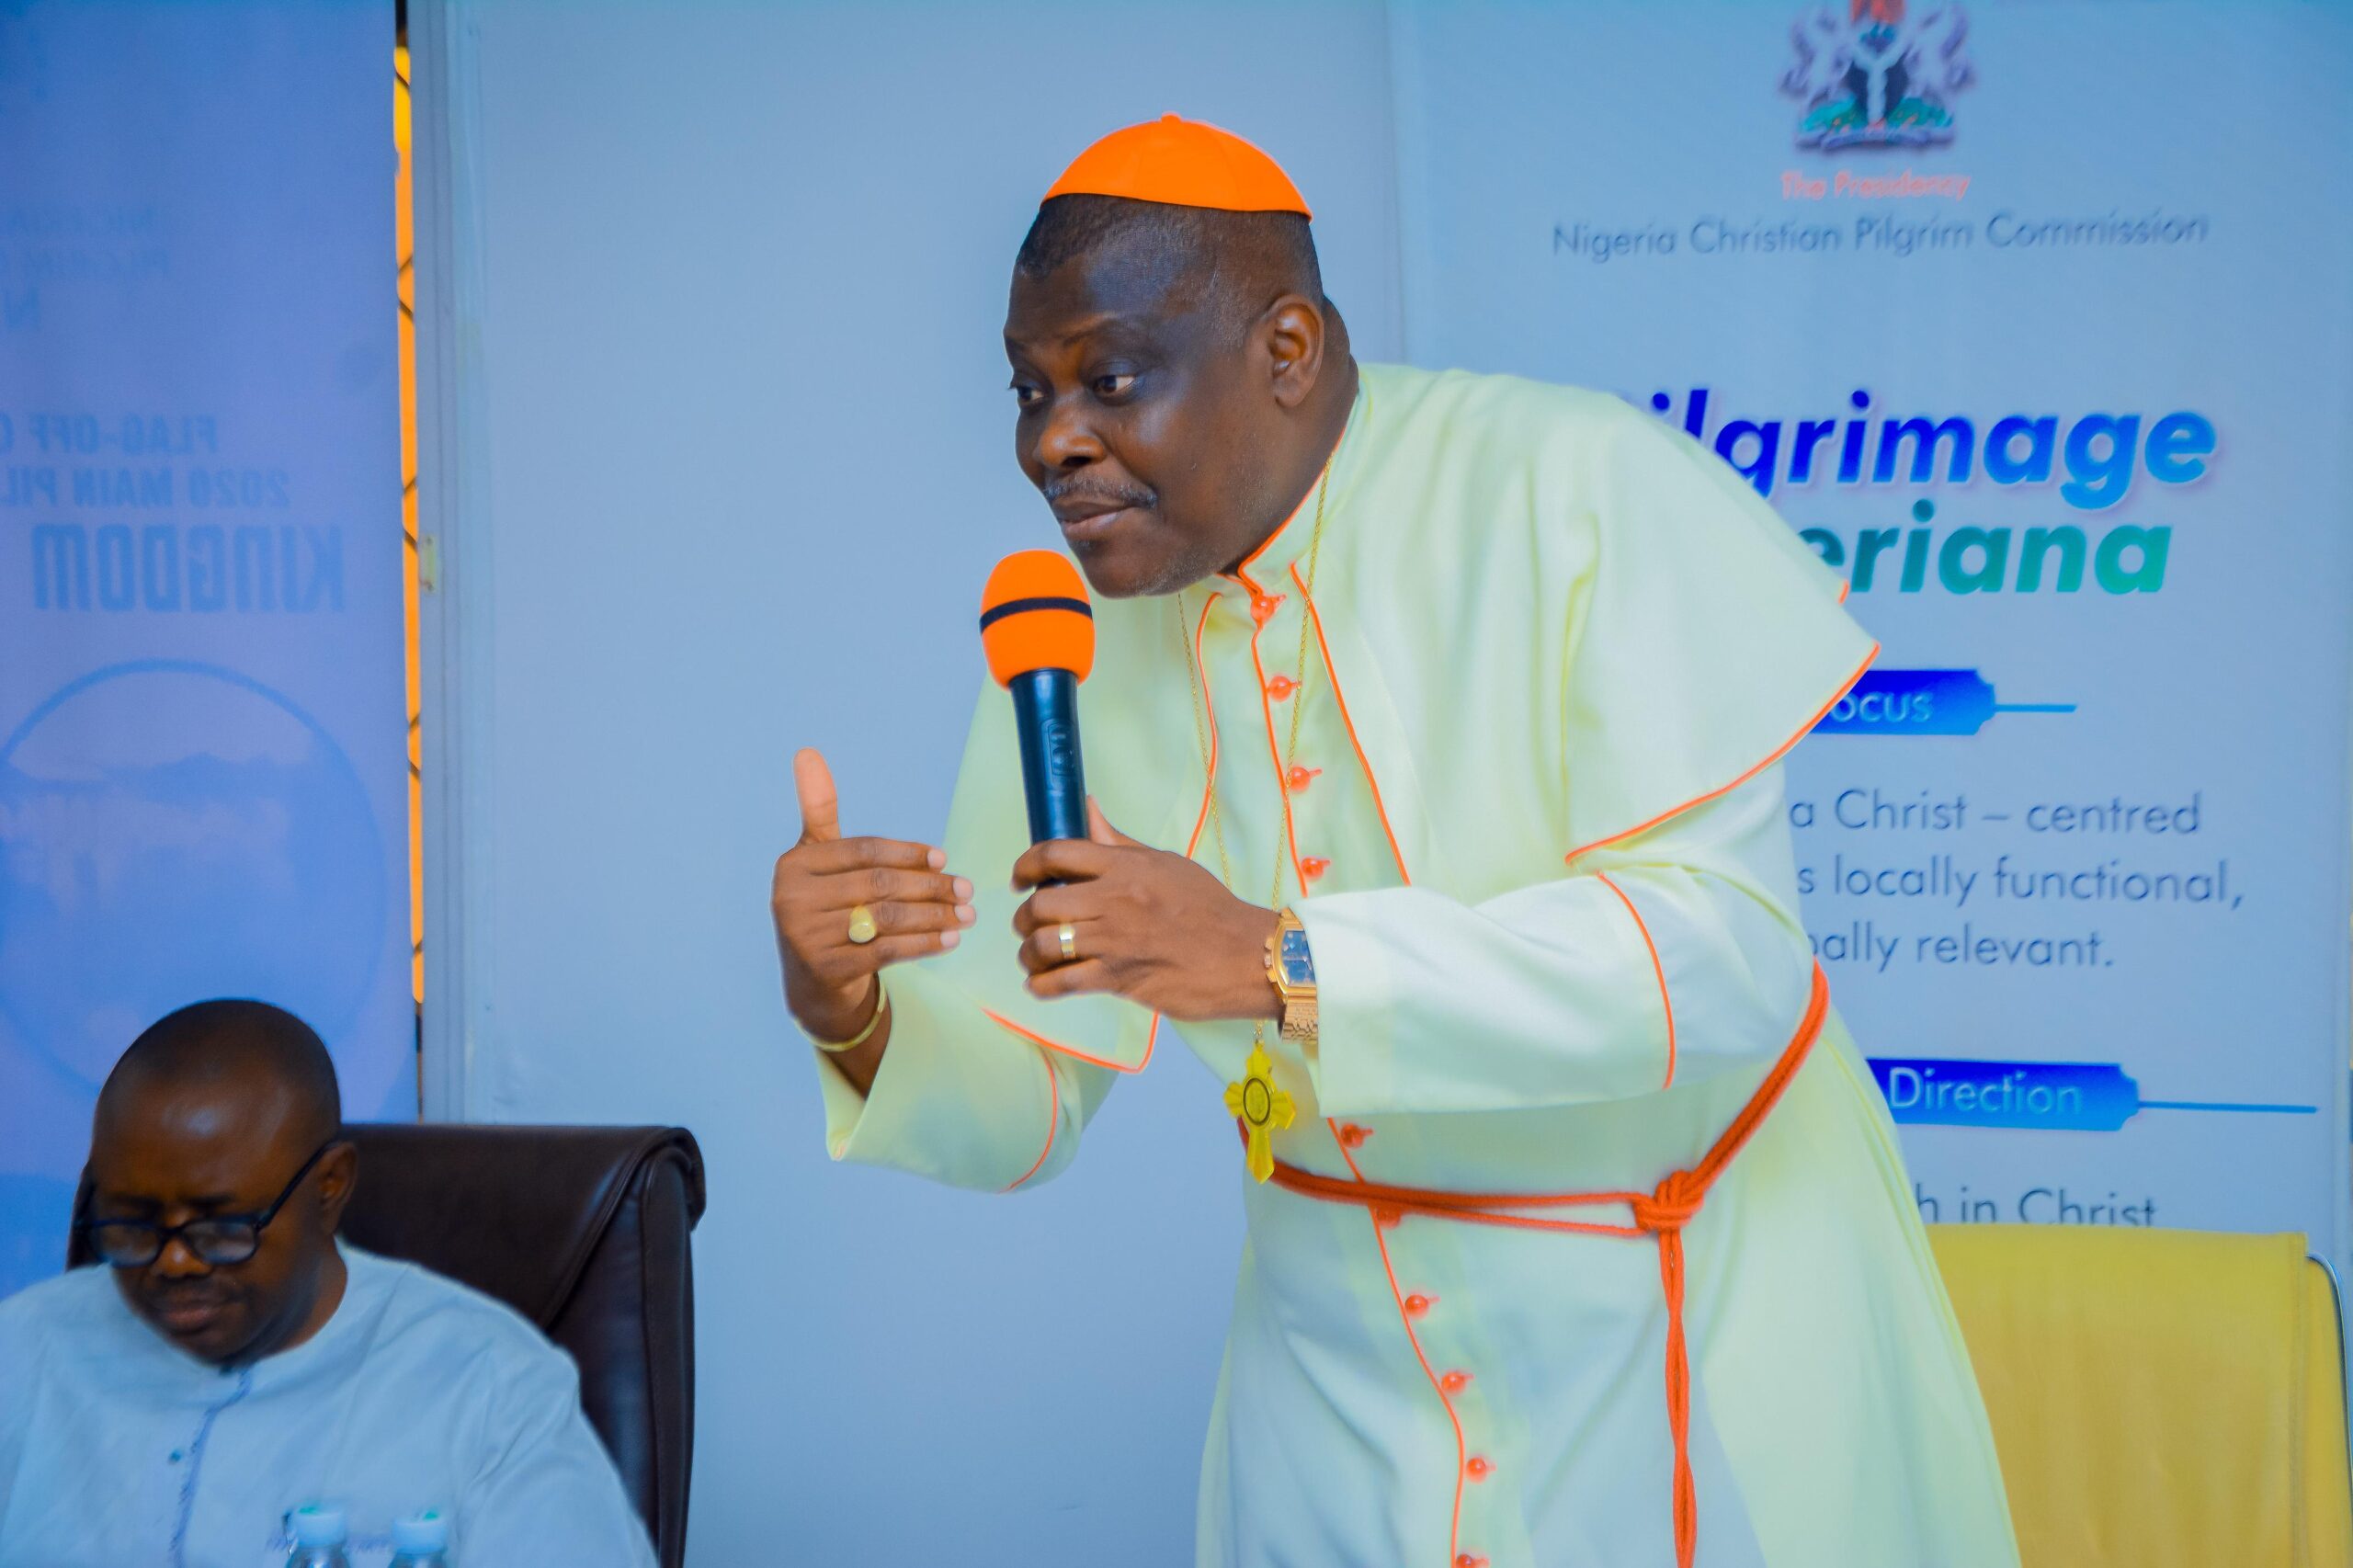 “It is a New Dawn, a New Beginning” – NCPC Boss Tells Pilgrimage Leaders